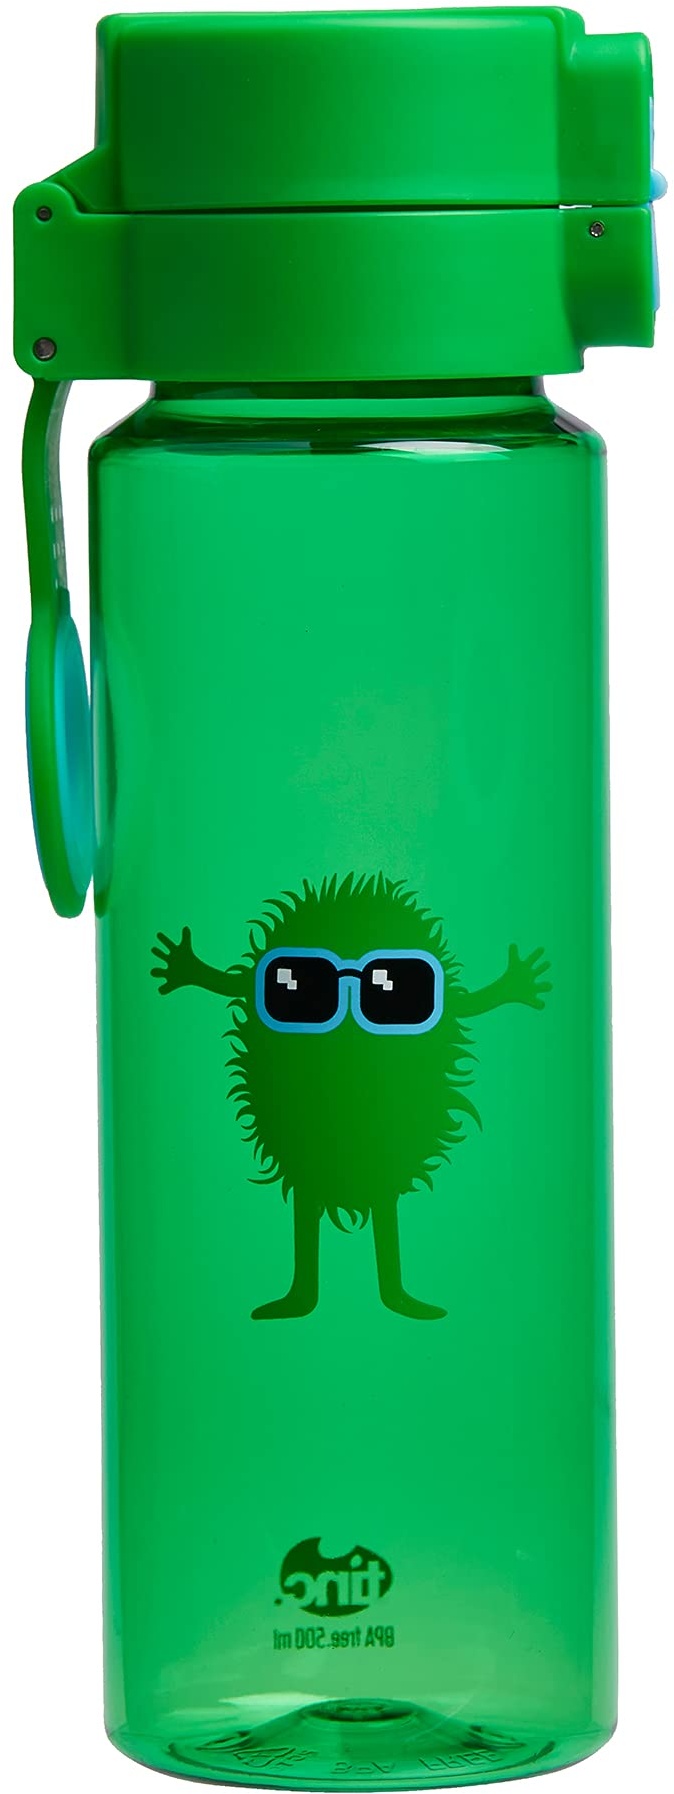 Tinc Hugga Flip & Clip No Leaks Kids Water Bottle | Lockable Flip Top Lid | Easy Carry Handle | Shatter Resistant | Great for School/Home or Gift | Girls and Boys | Multiple Character Designs - Green